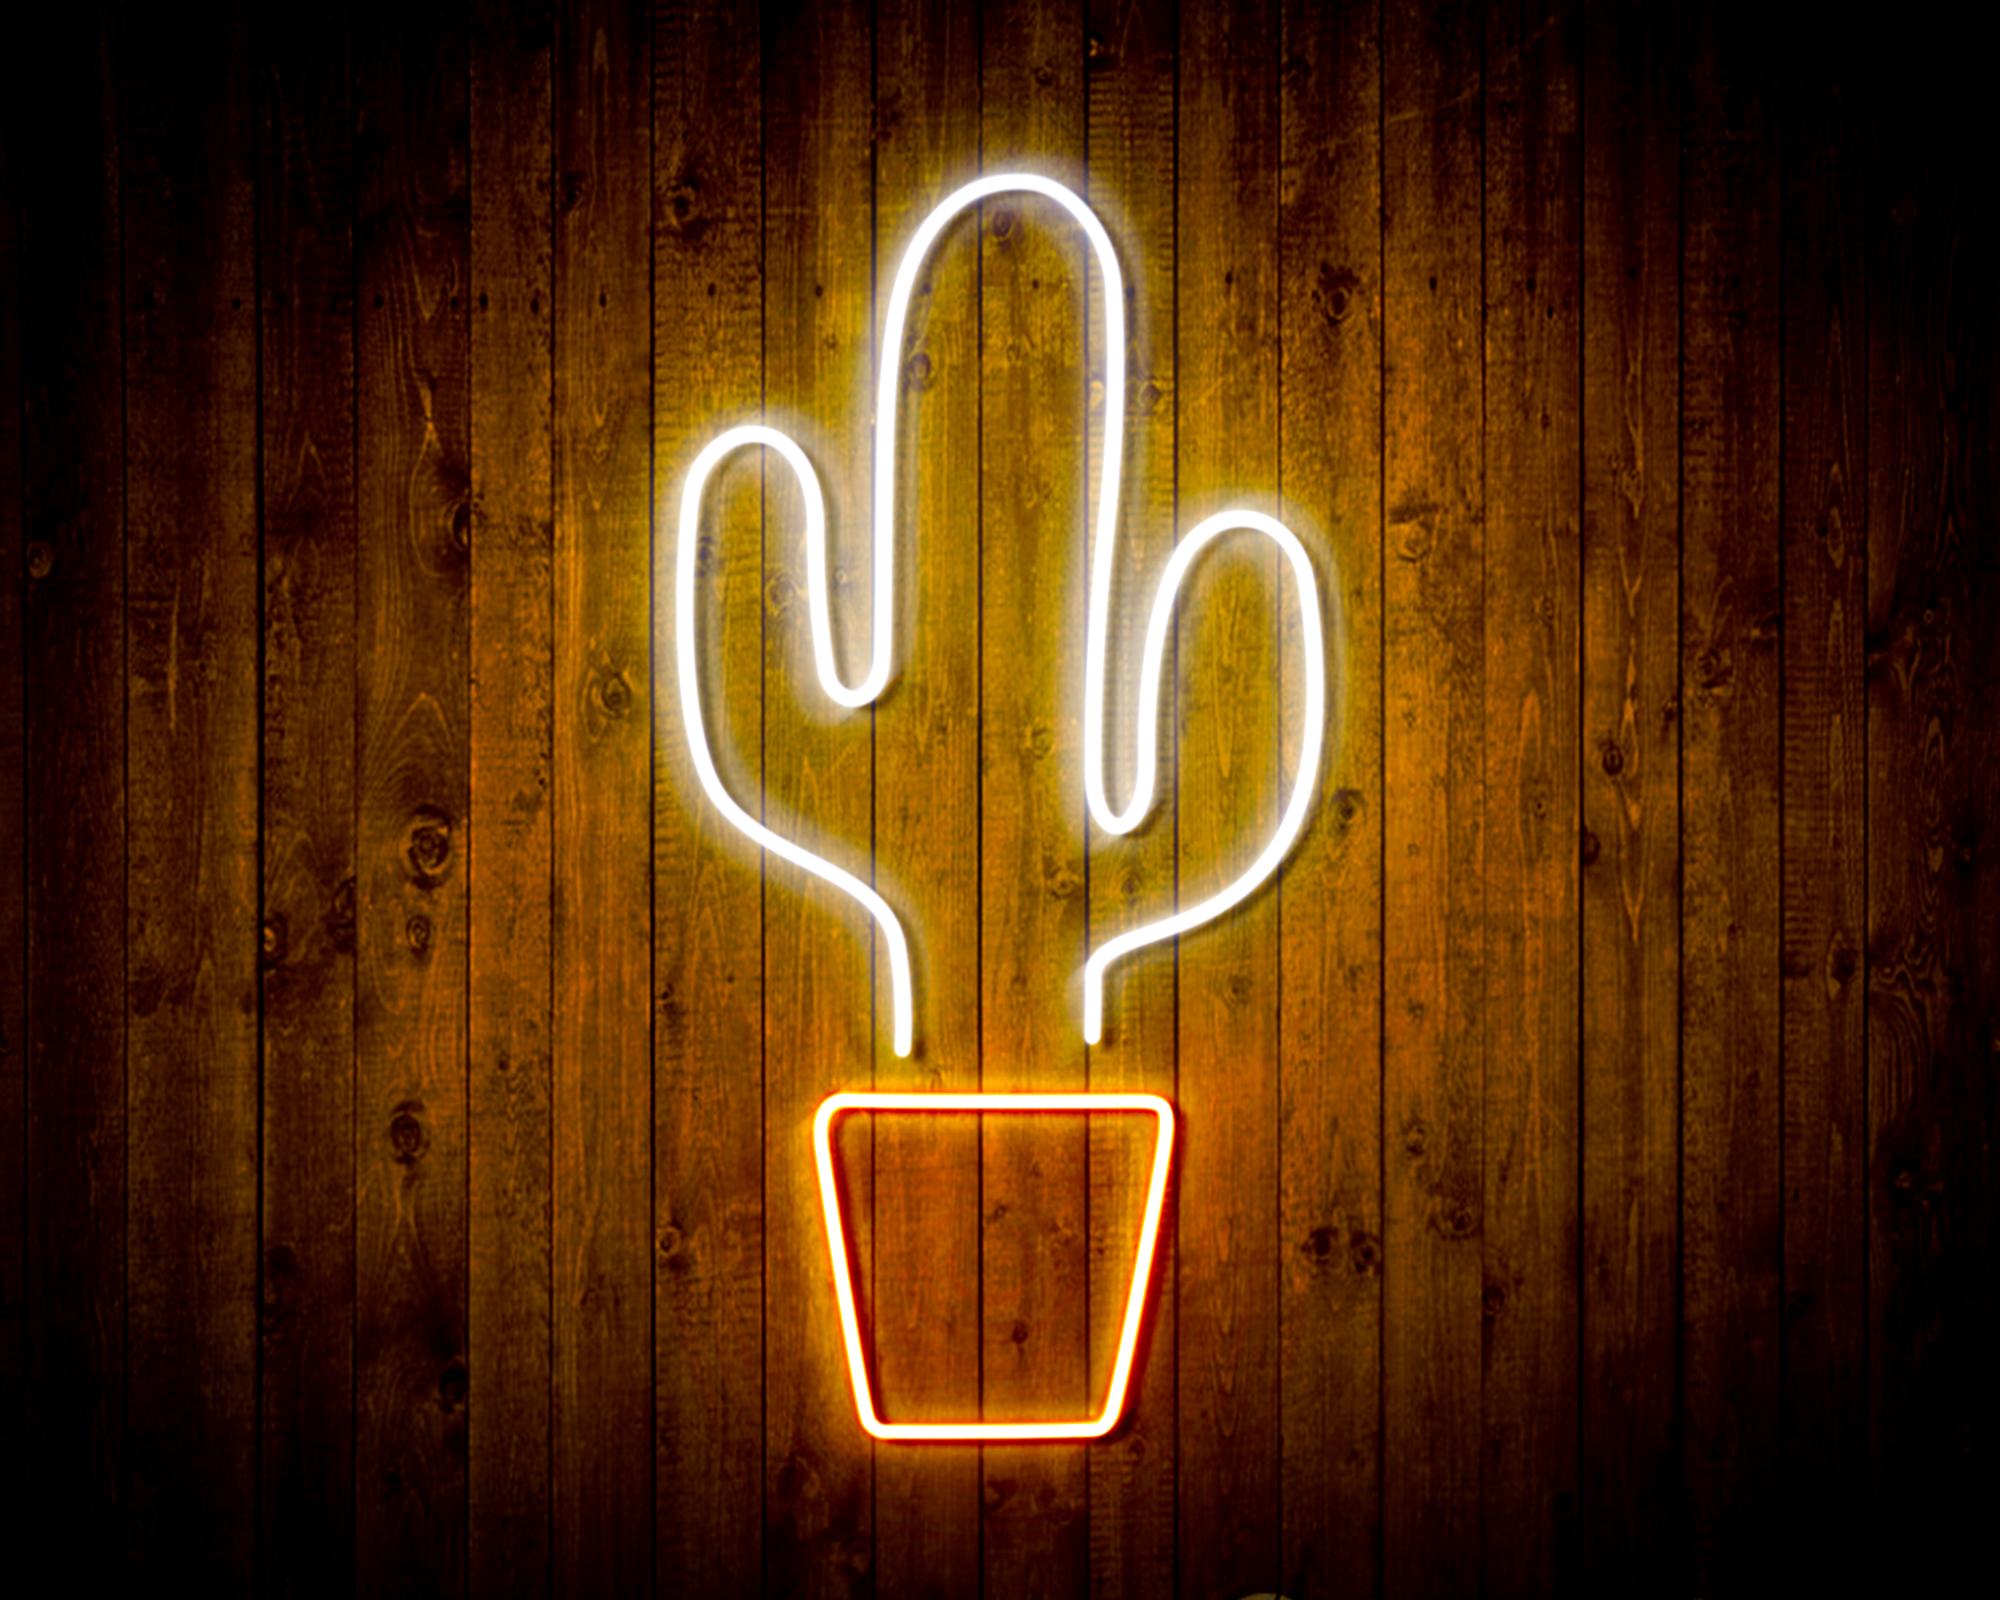 Green Cactus LED Neon Sign